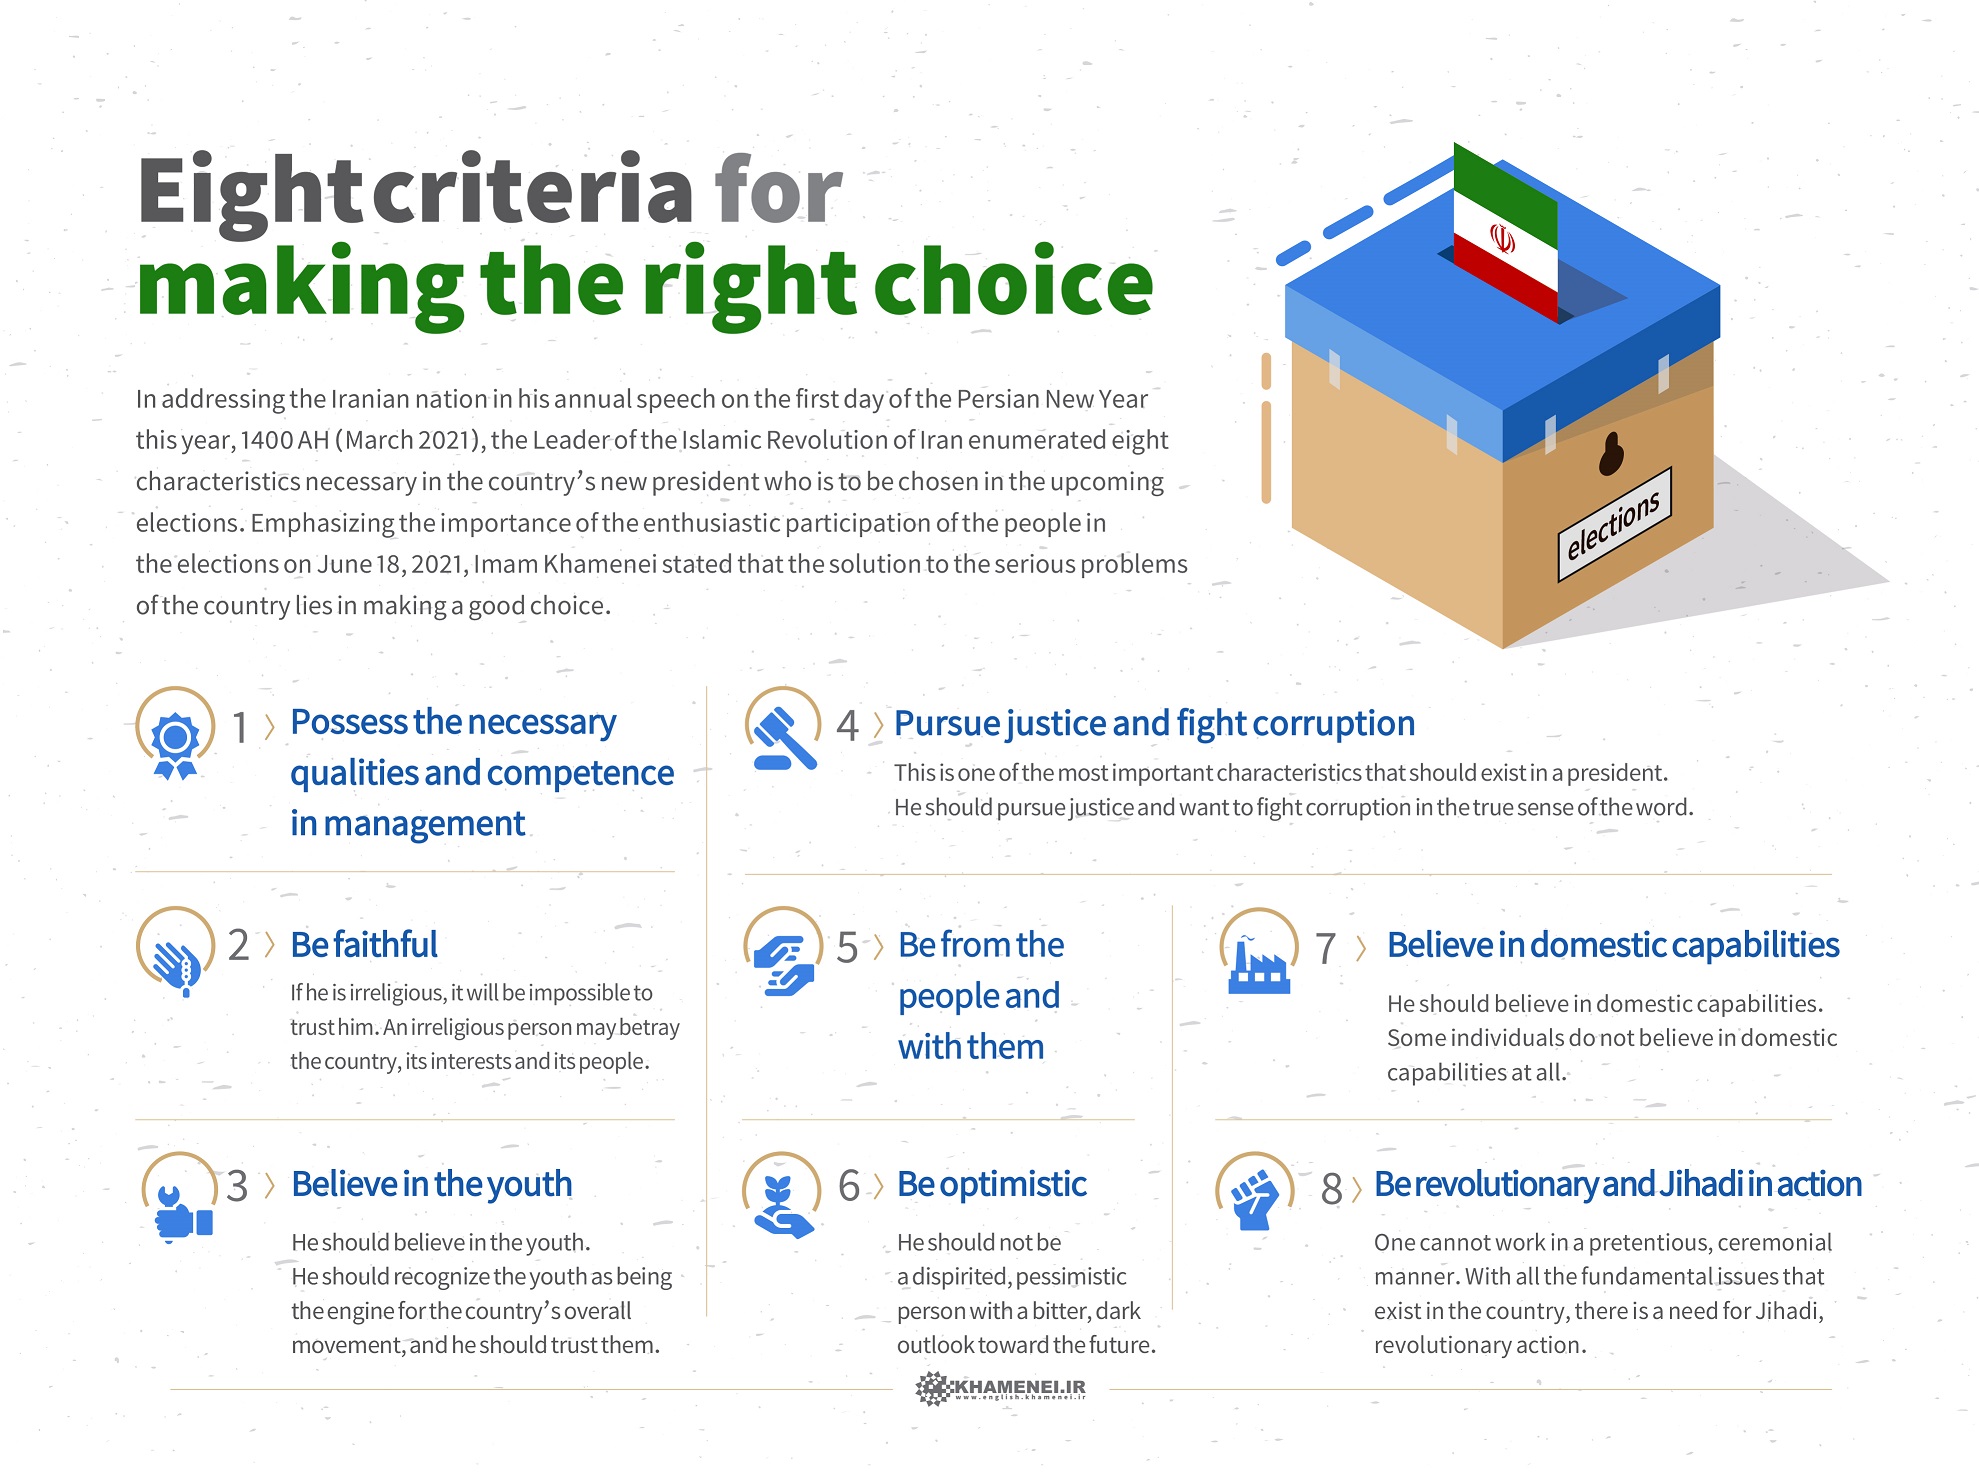 Eight criteria for making the right choice